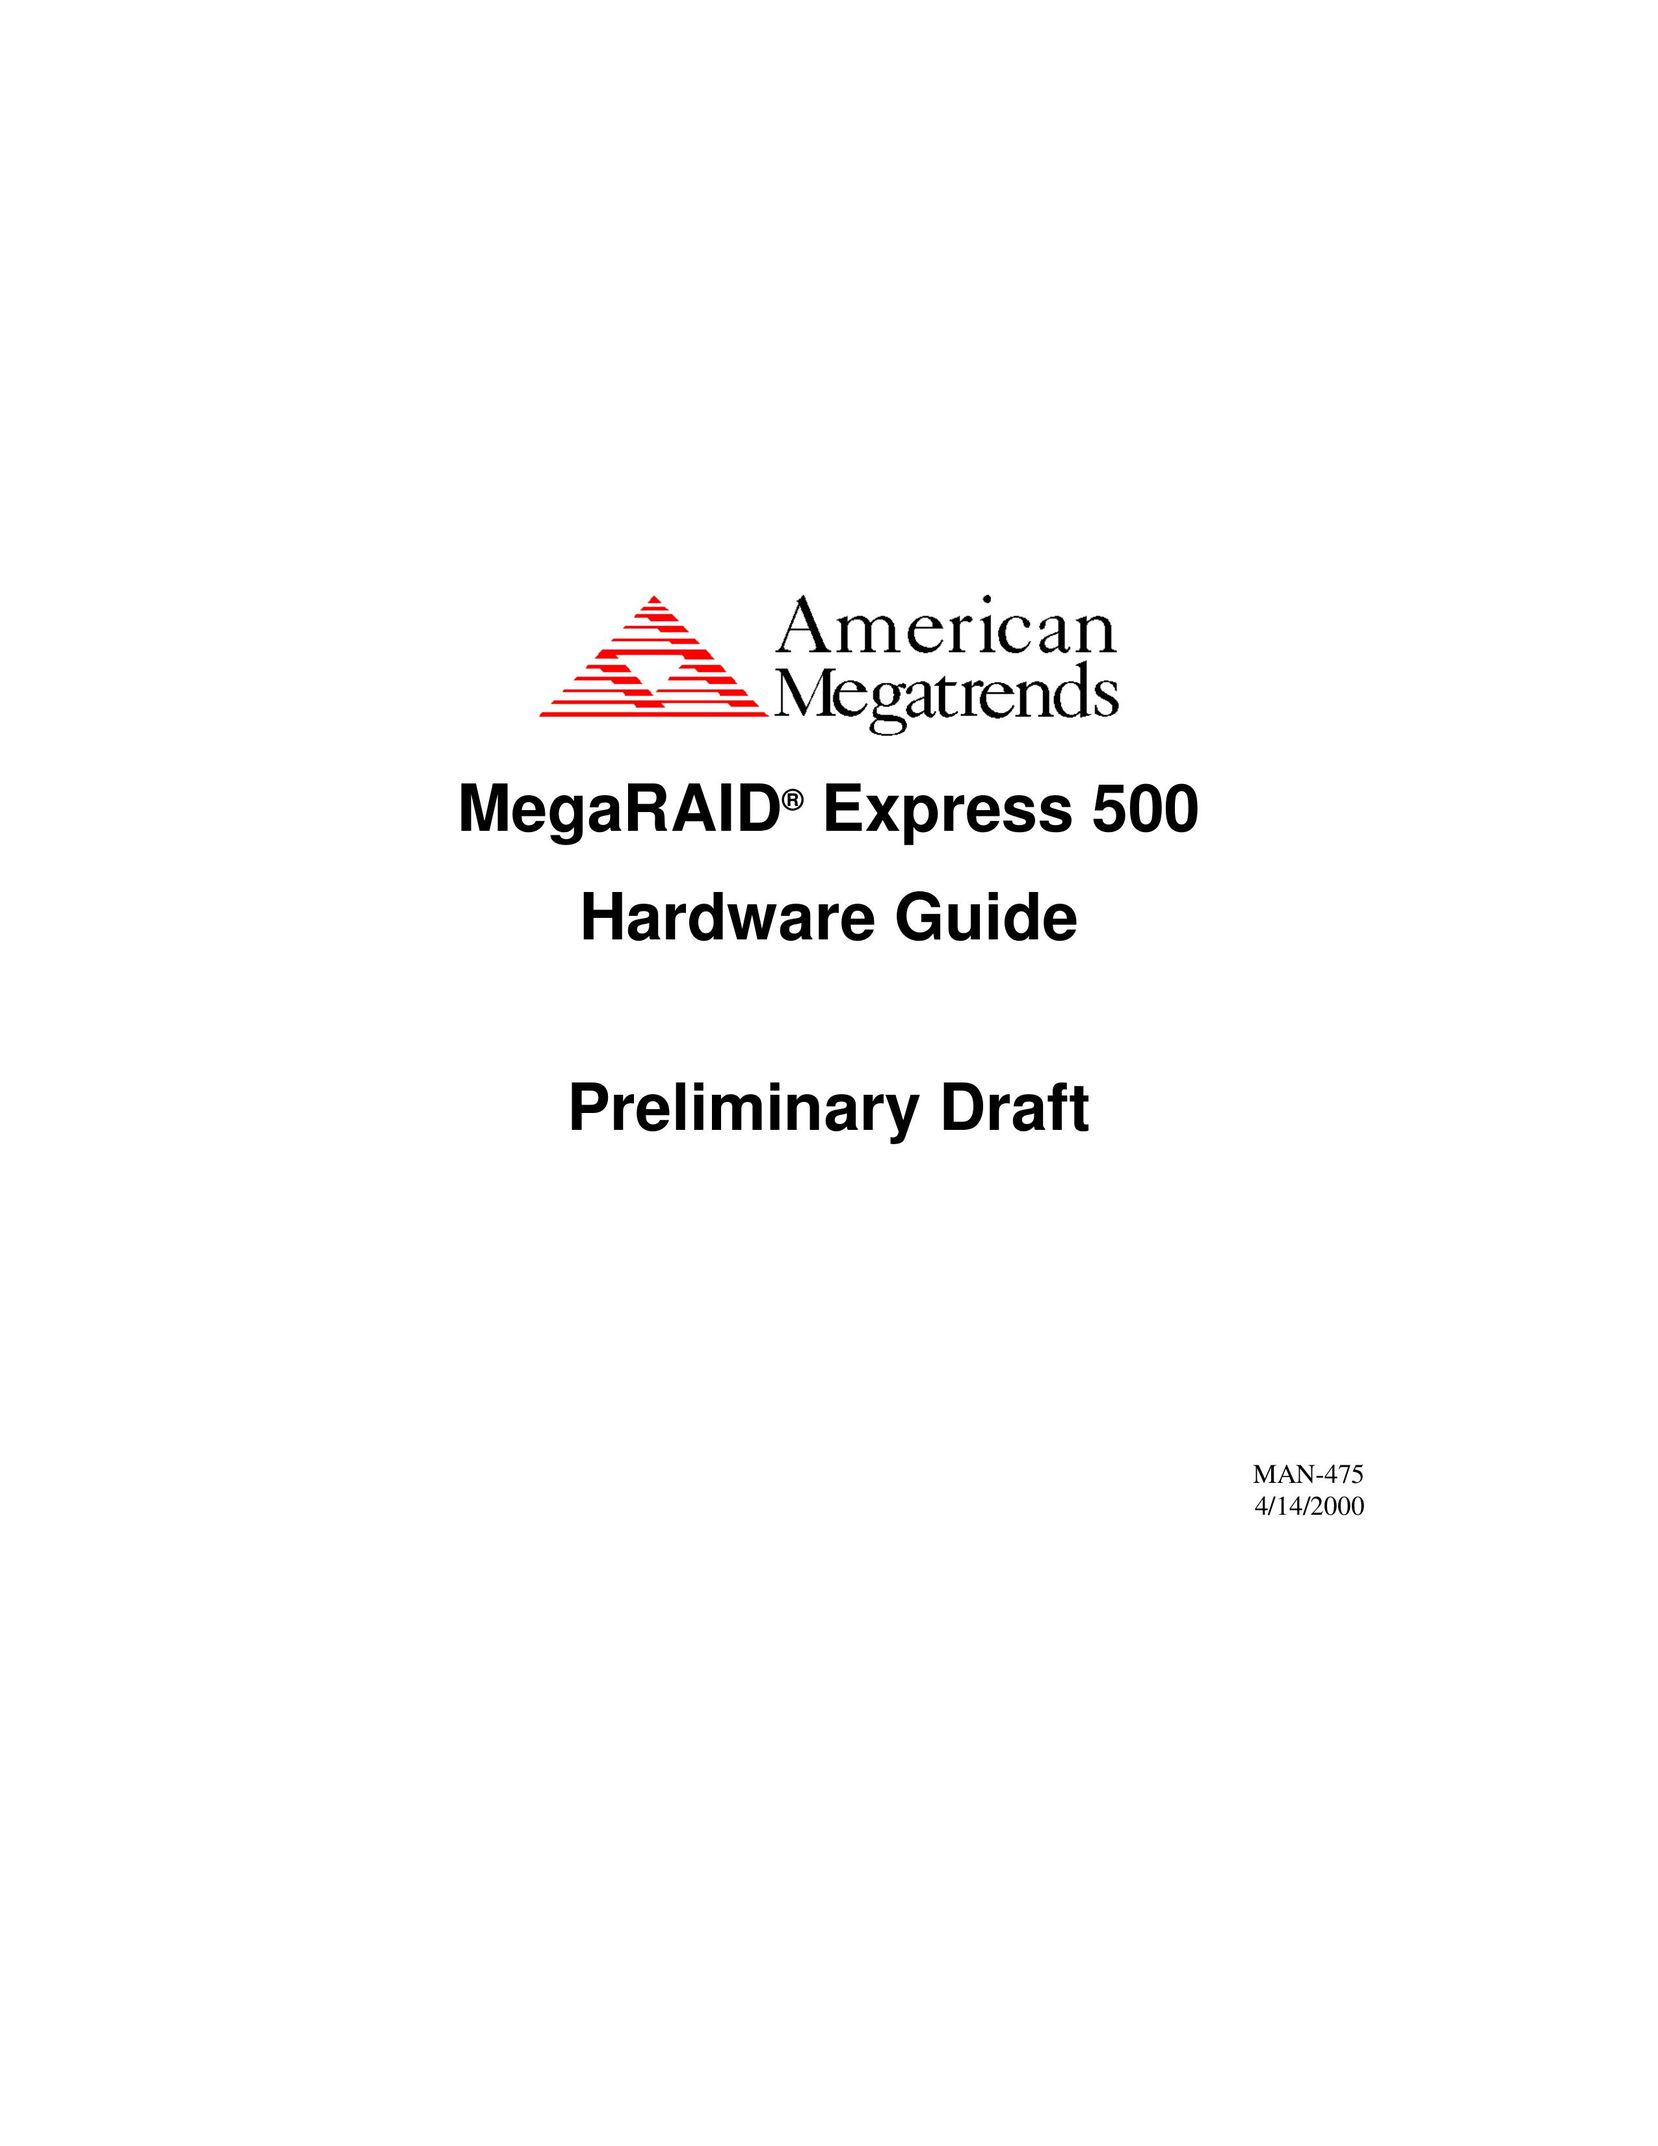 American Megatrends Express 500 Network Card User Manual